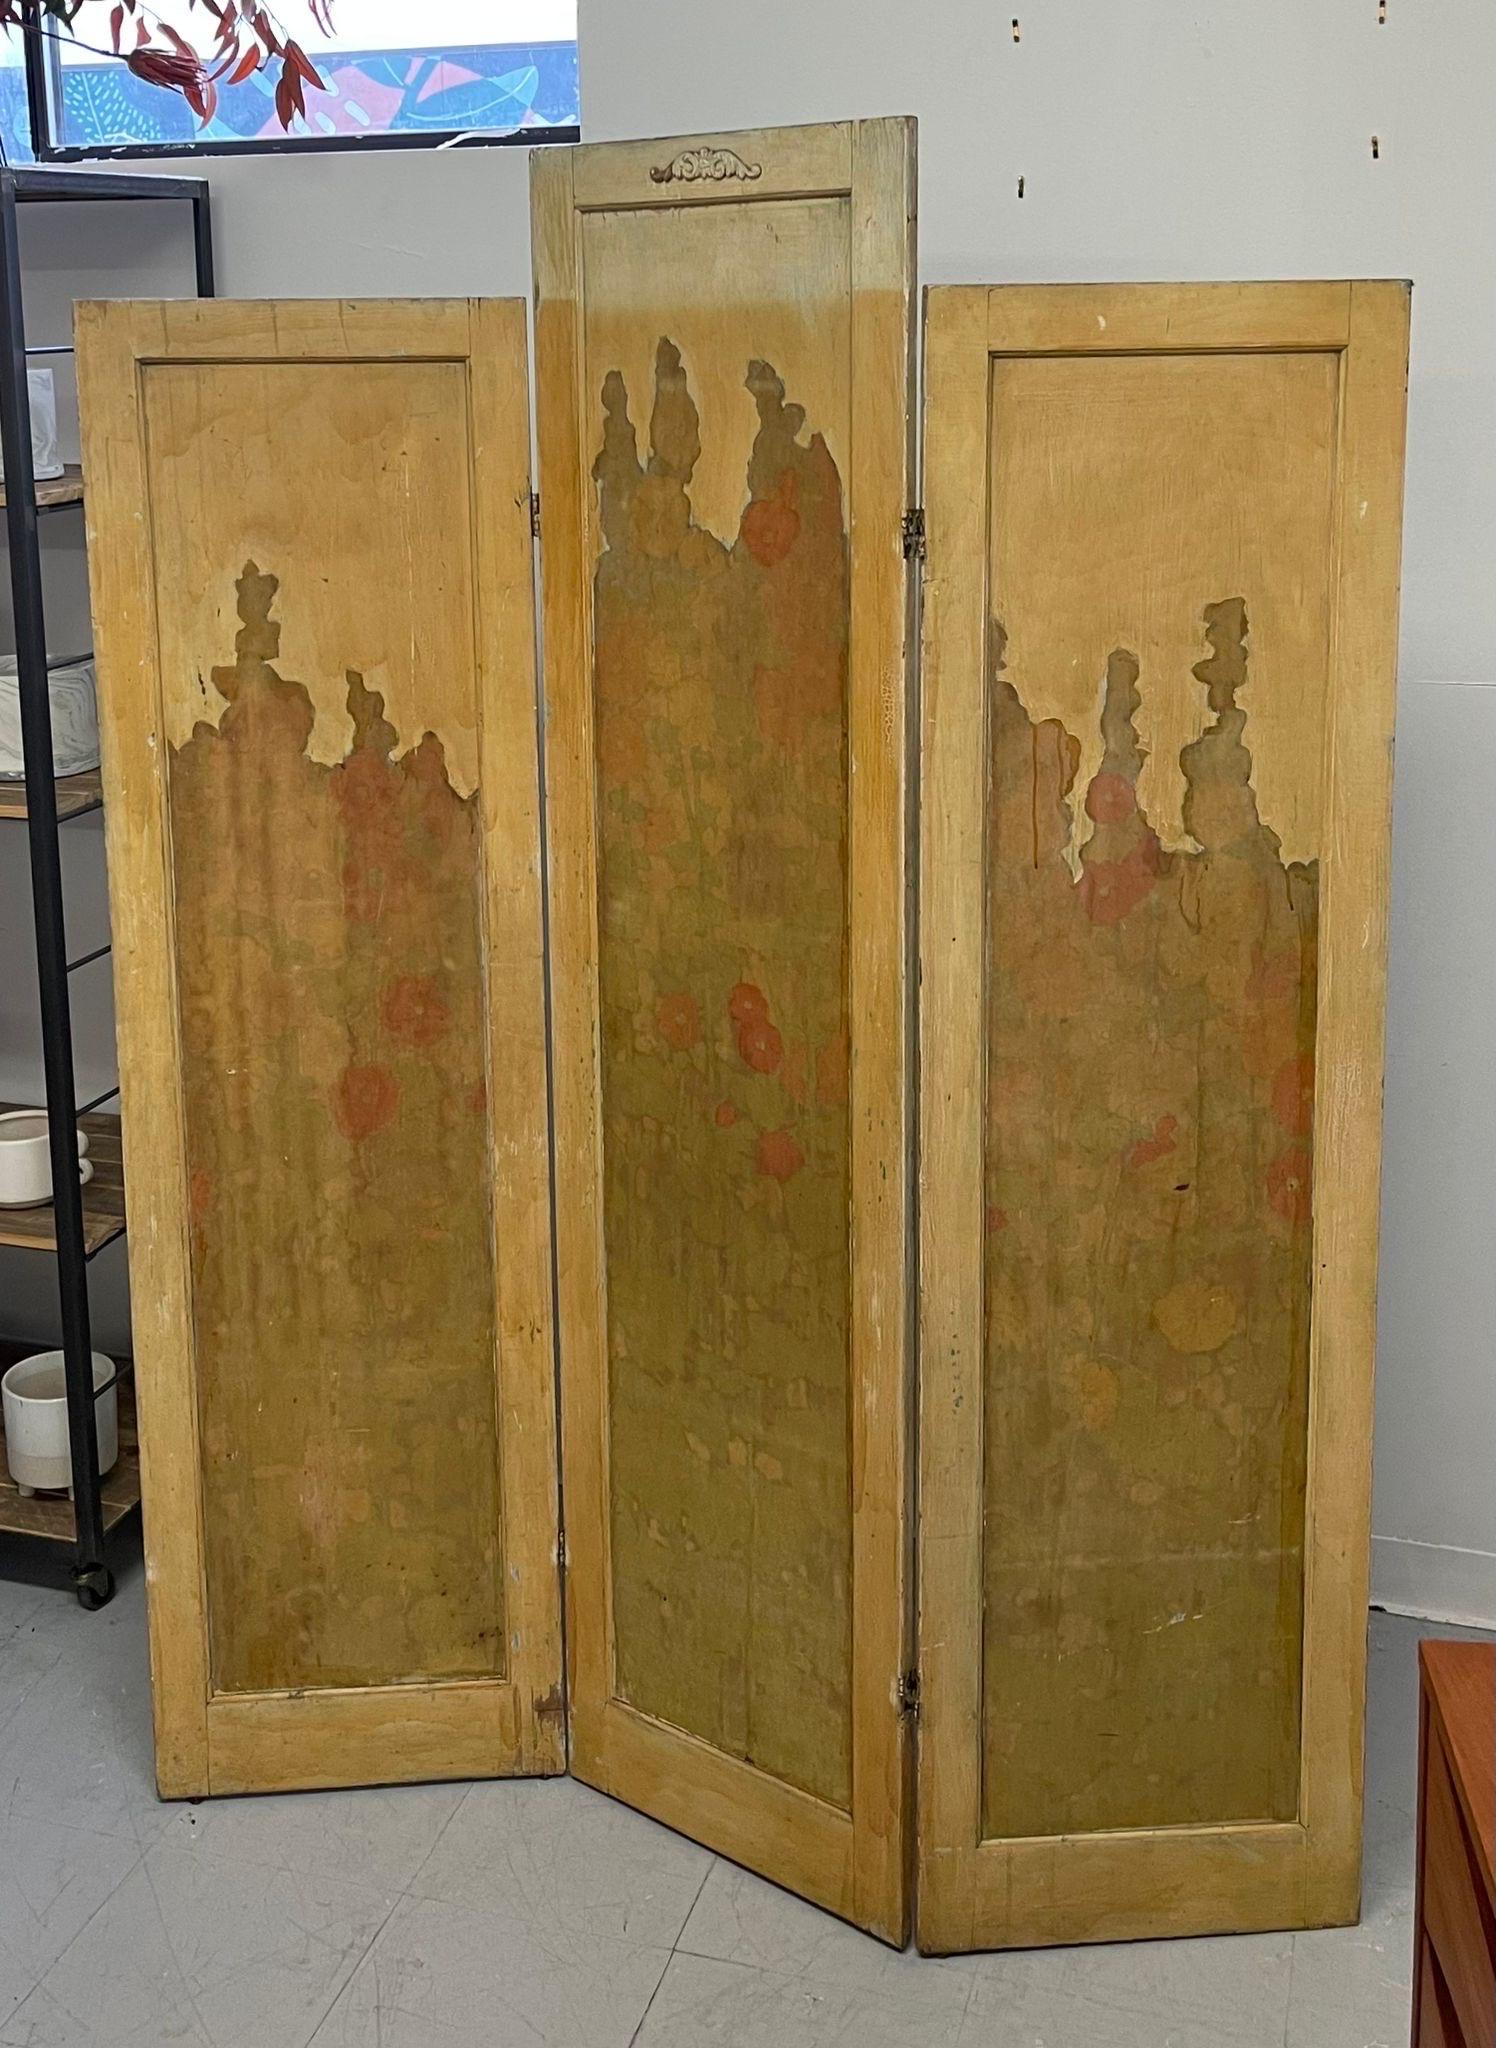 Three Pane Room Divider , Painted Green on one Side with a Floral Motif on the Other. Edges are Yellow , the Top of the Middle Pane is White, Probably From Exposure to the Elements Over Time.

Dimensions. 54 1/2 W ; 2 D ; 72 H